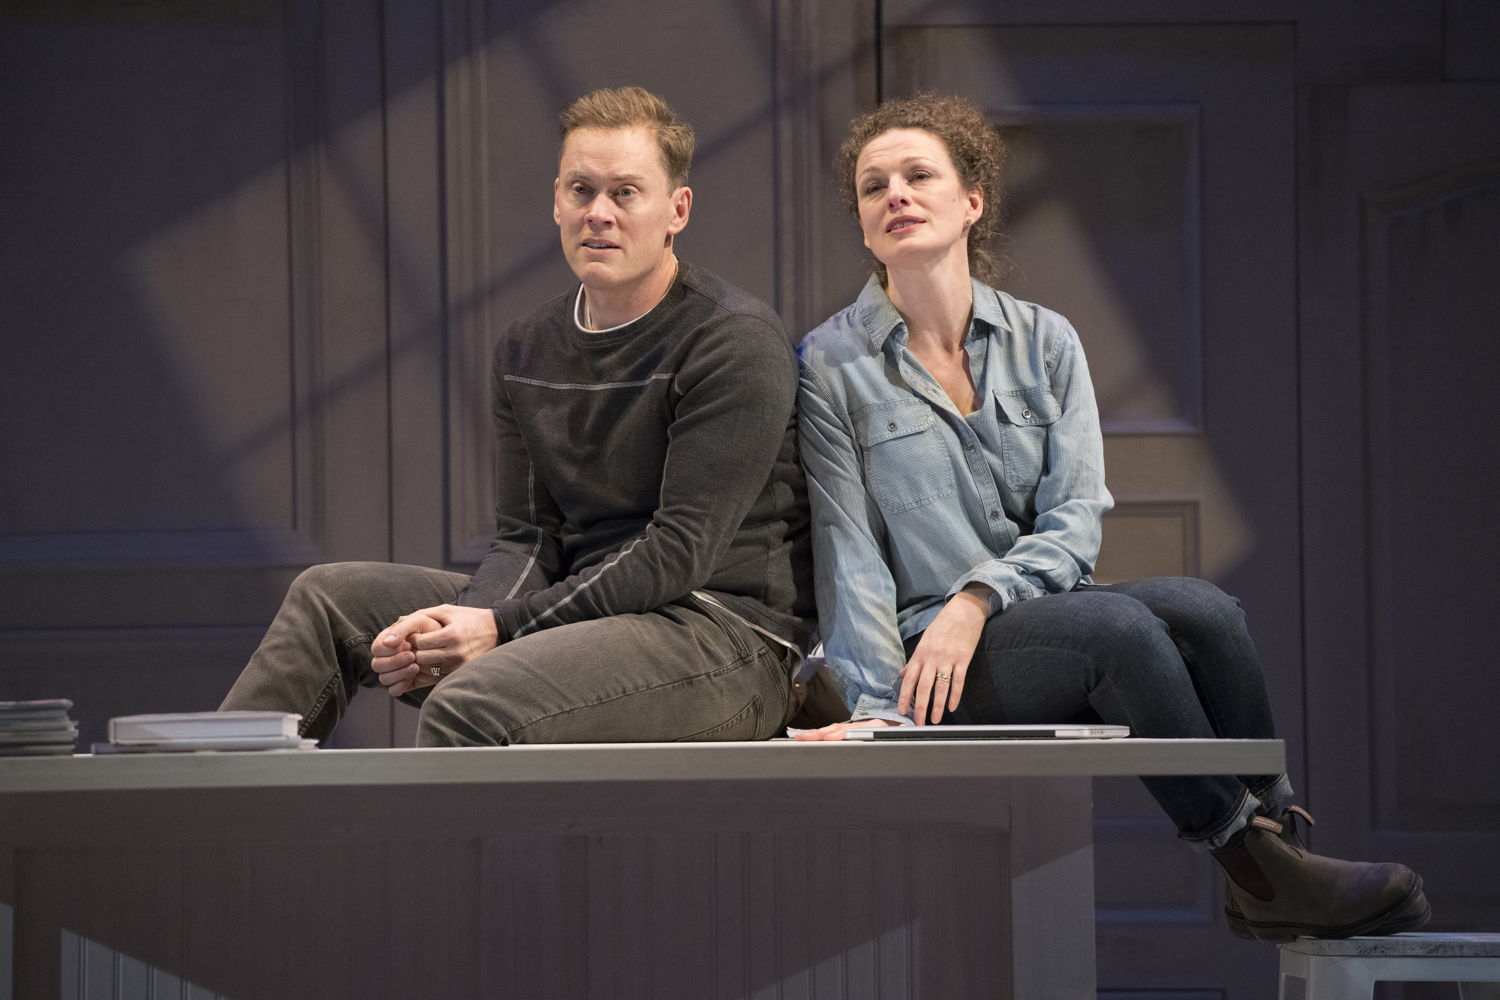 Craig Erickson (Tom) and Jennifer Lines (Jane) in Forget About Tomorrow / Photos by David Cooper